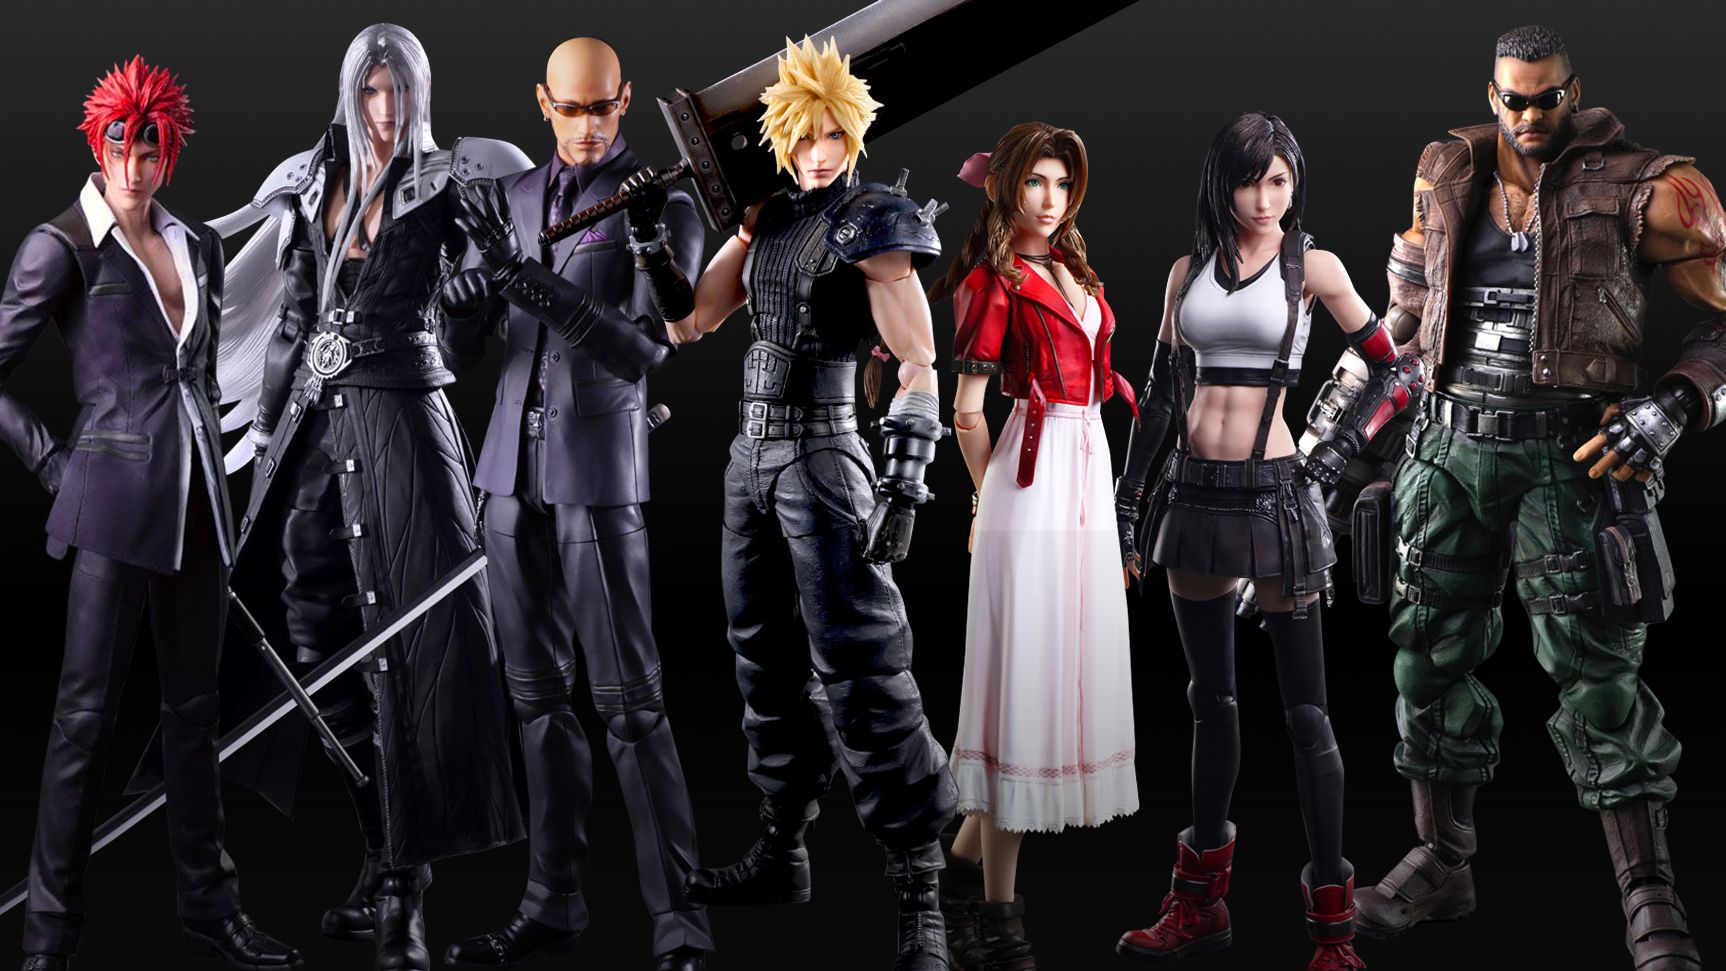 “The #FF7R Sephiroth, Reno, and Rude PLAY ARTS figurines will join the Squa...